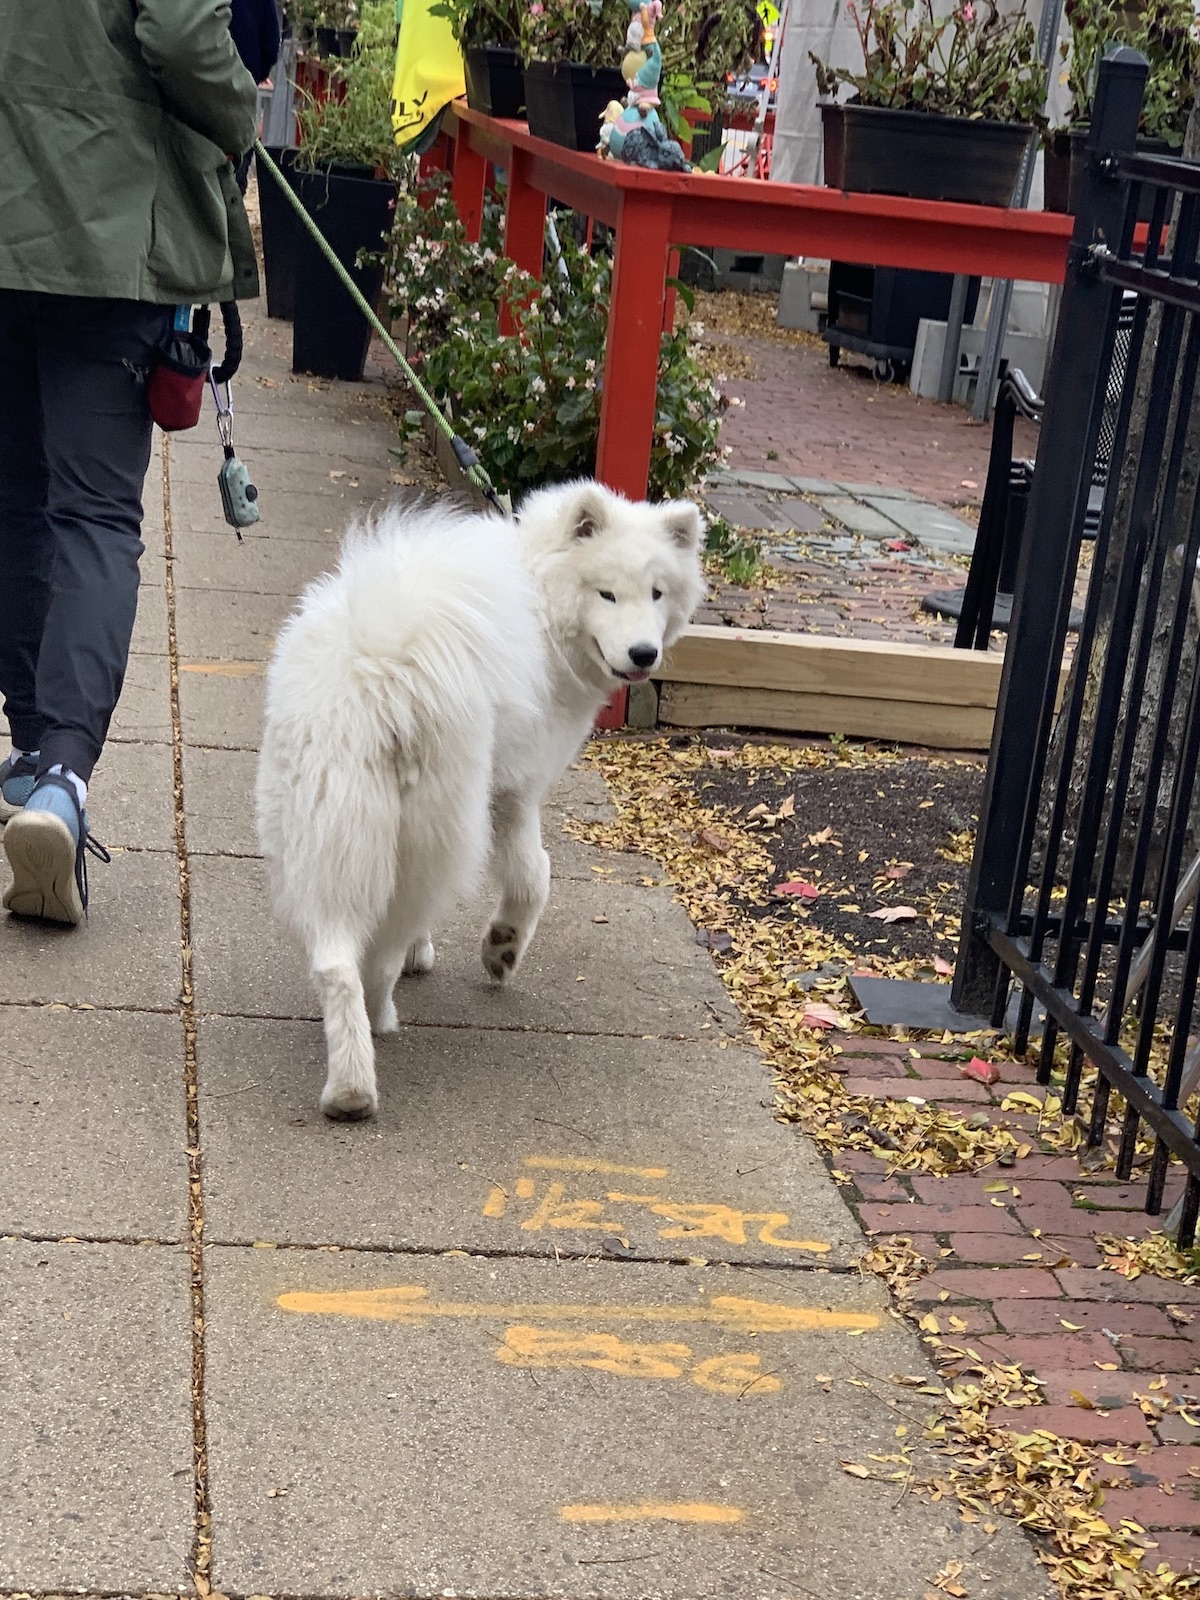 A samoyed turns to look at you as you walk down the street.